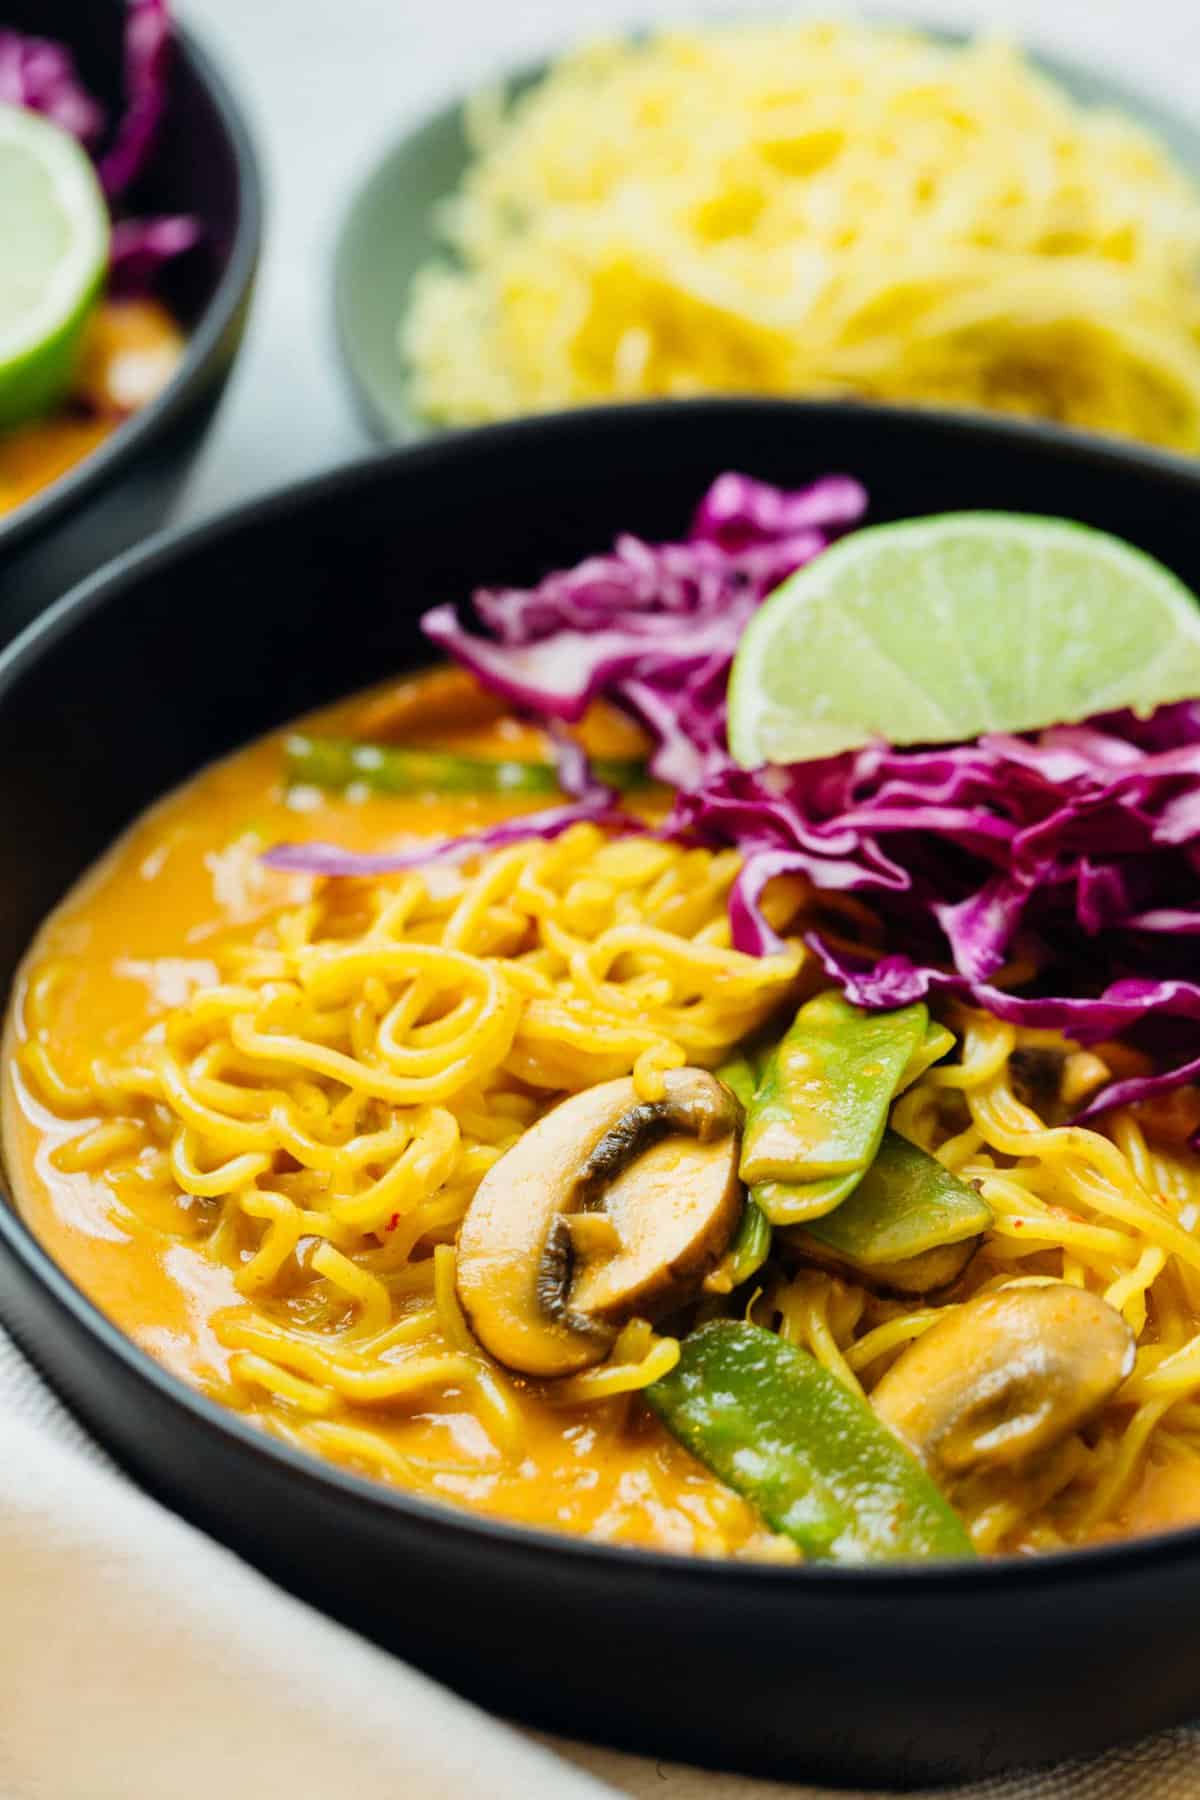 This coconut curry ramen will warm you right up! A delicious broth coats the tender ramen noodles. You will want to slurp up every last drop of this soup and ramen!